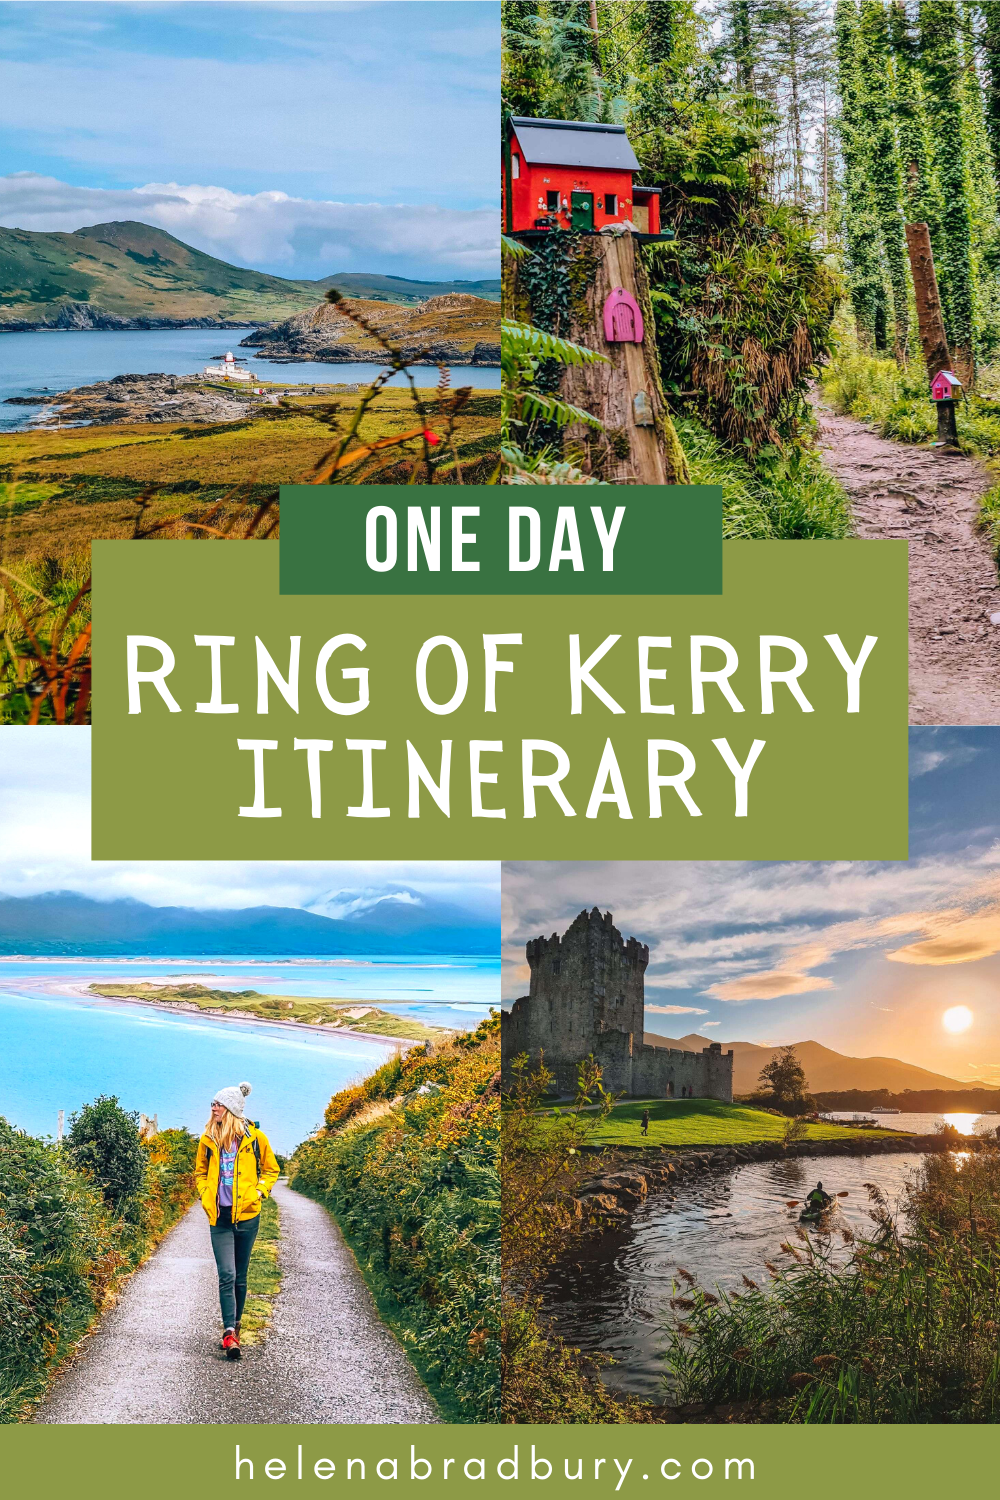 This one day Ring of Kerry itinerary covers all the best Ring of Kerry stops to plan your day on this epic Ireland driving route. Plus optional stops to add if you’re staying for longer. | ring of kerry ireland road trips | ring of kerry ireland beau